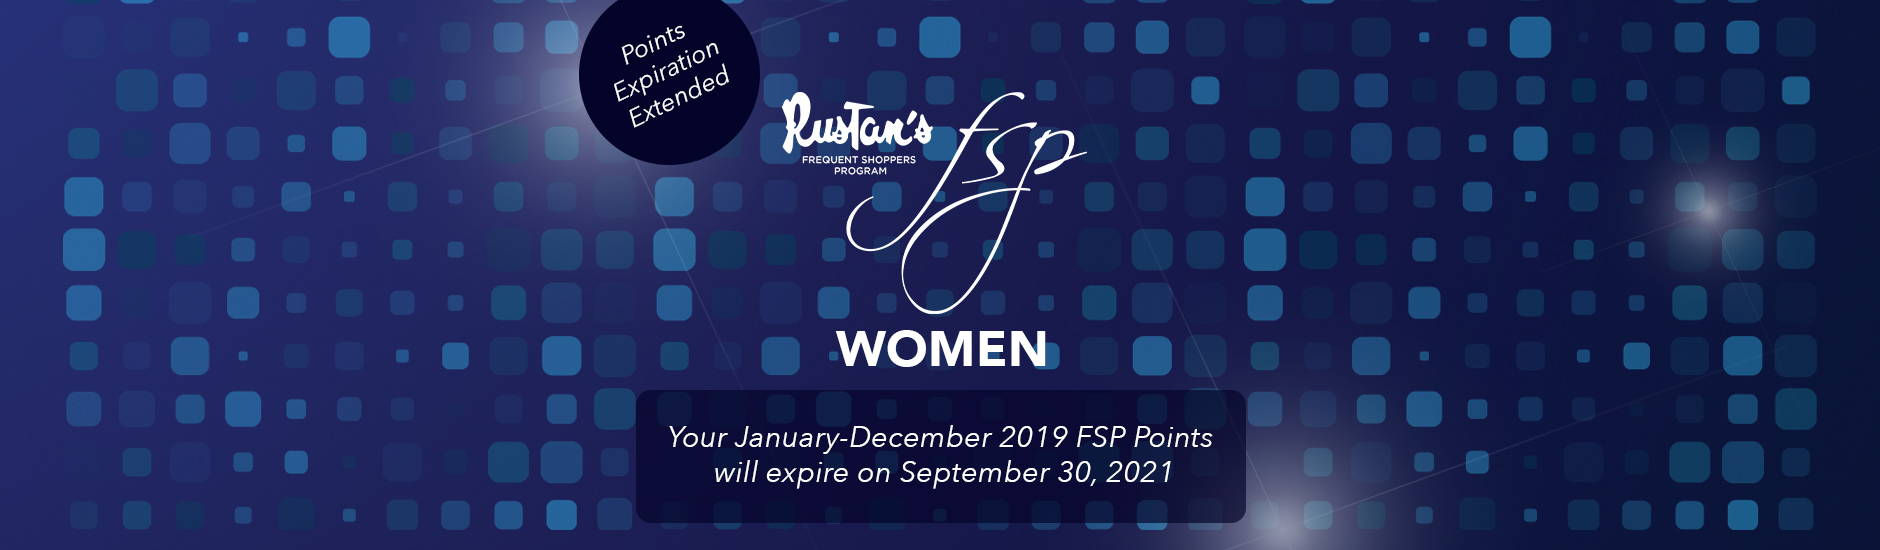 EXTENDED: Your FSP Points Are Waiting - Women